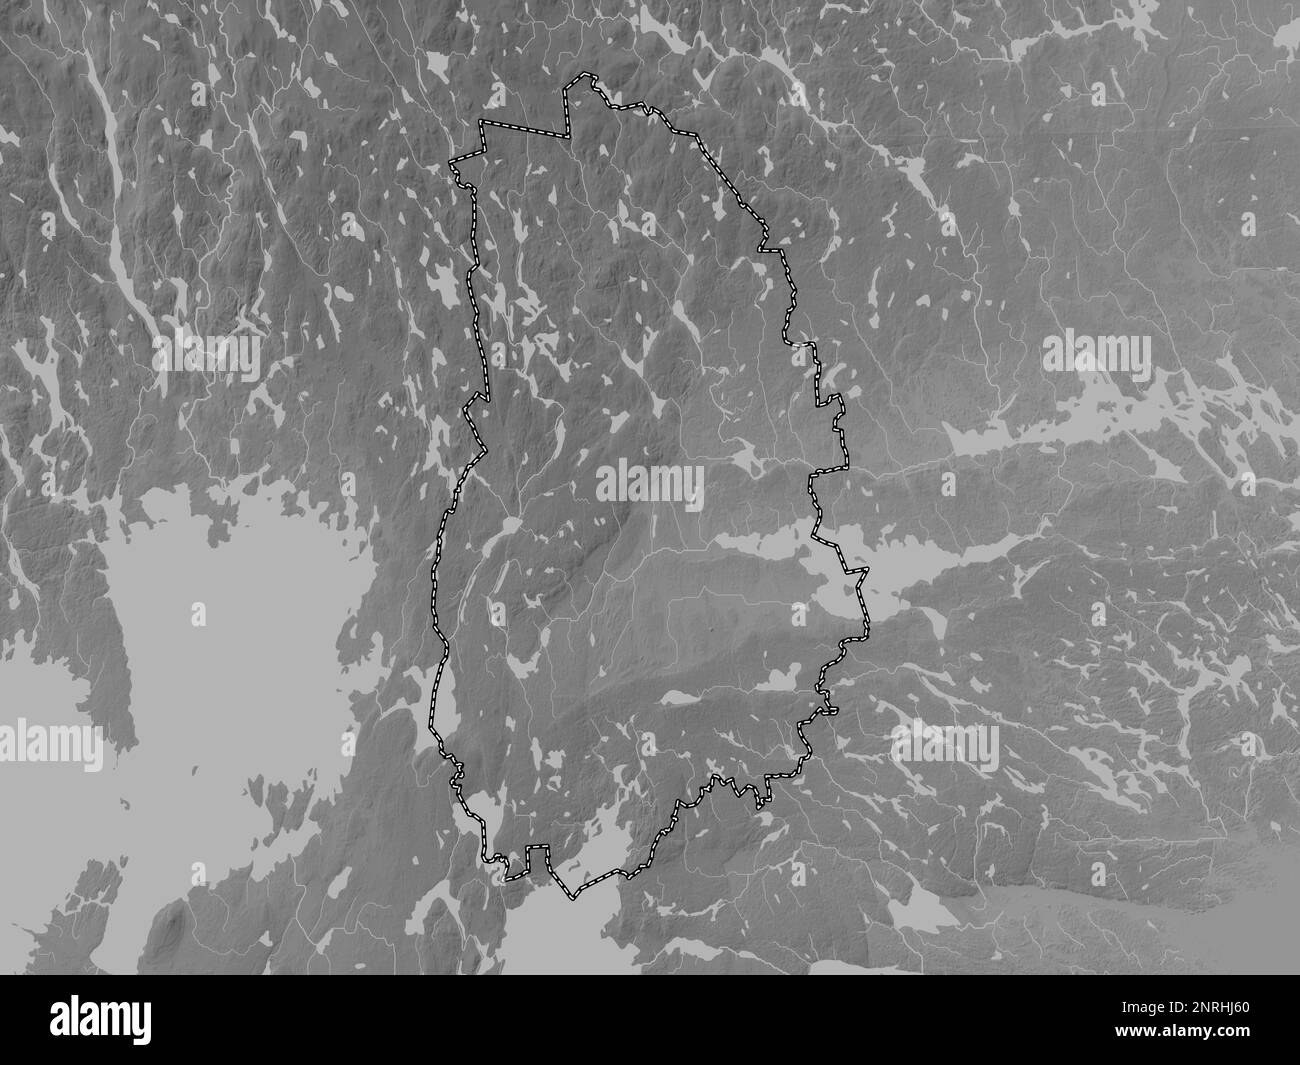 Orebro, county of Sweden. Grayscale elevation map with lakes and rivers Stock Photo